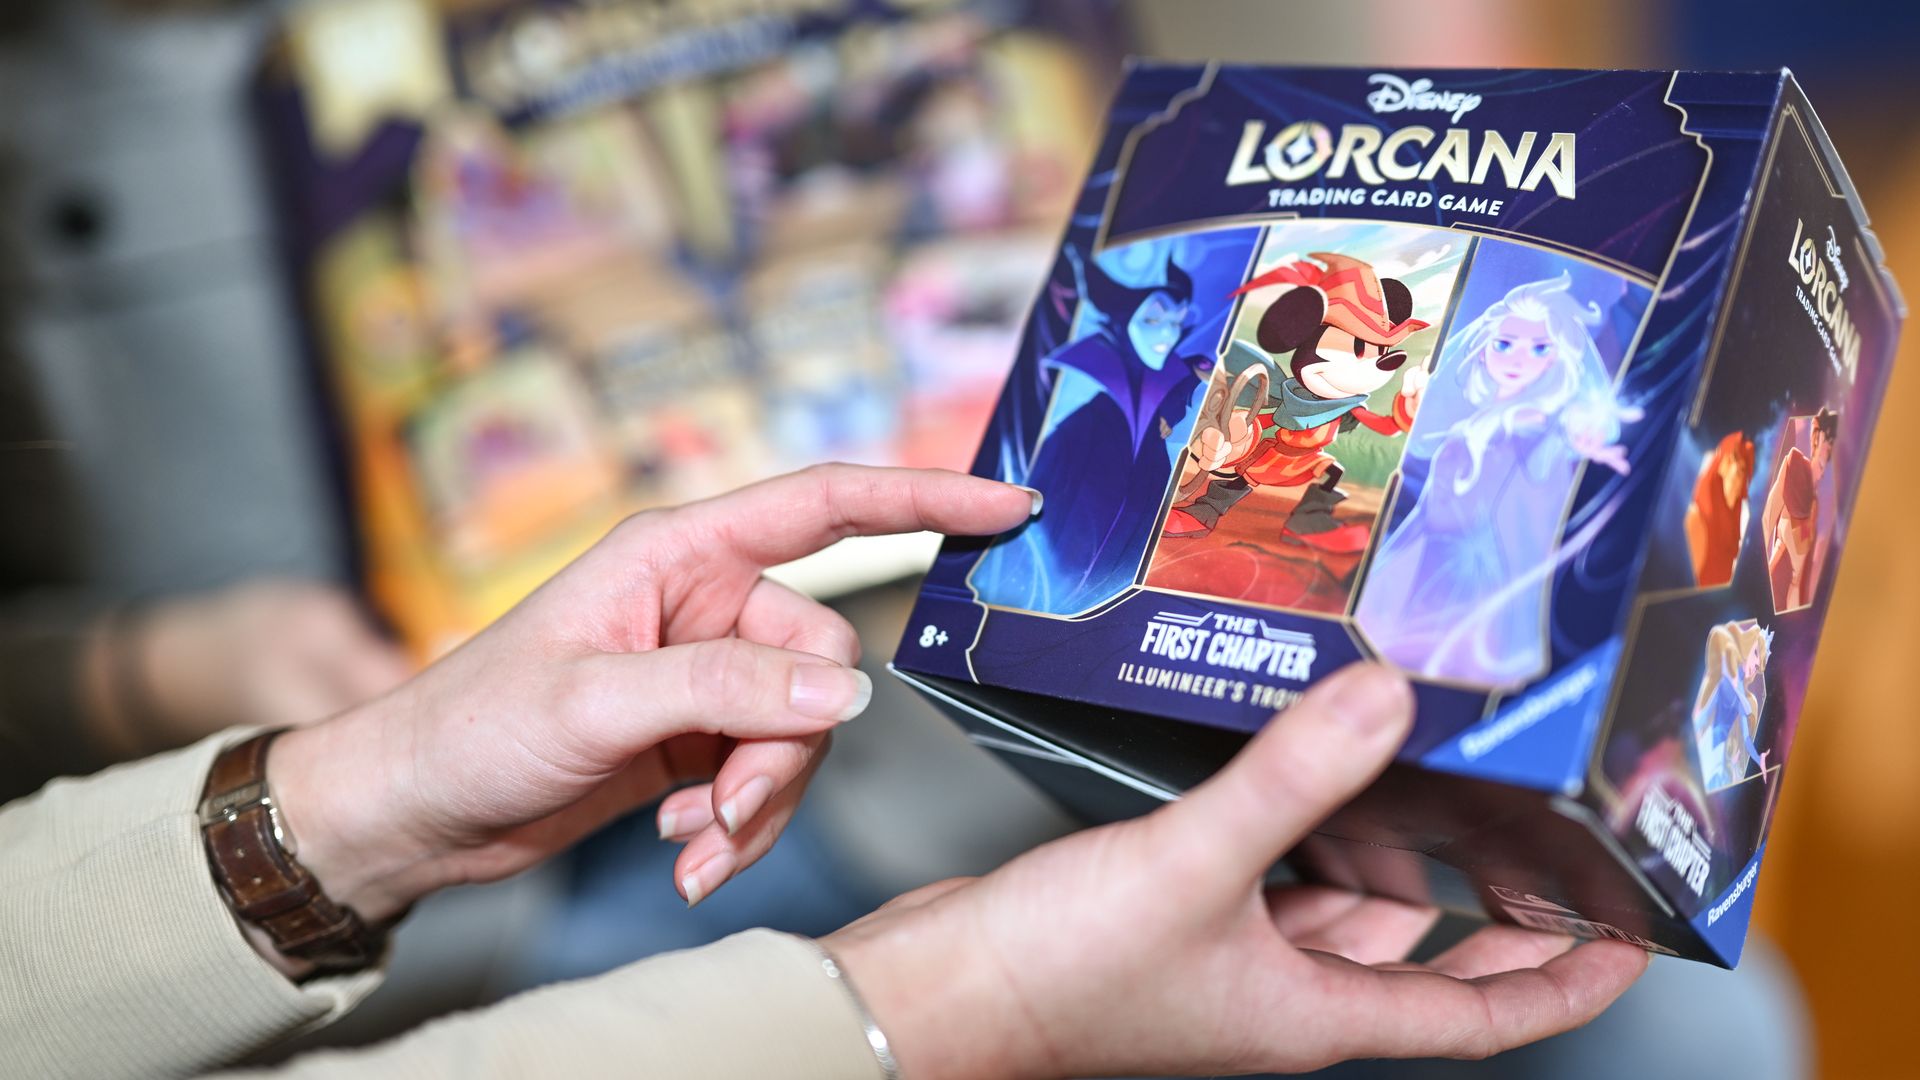 A woman holds a box containing the new Disney Lorcana trading card game.